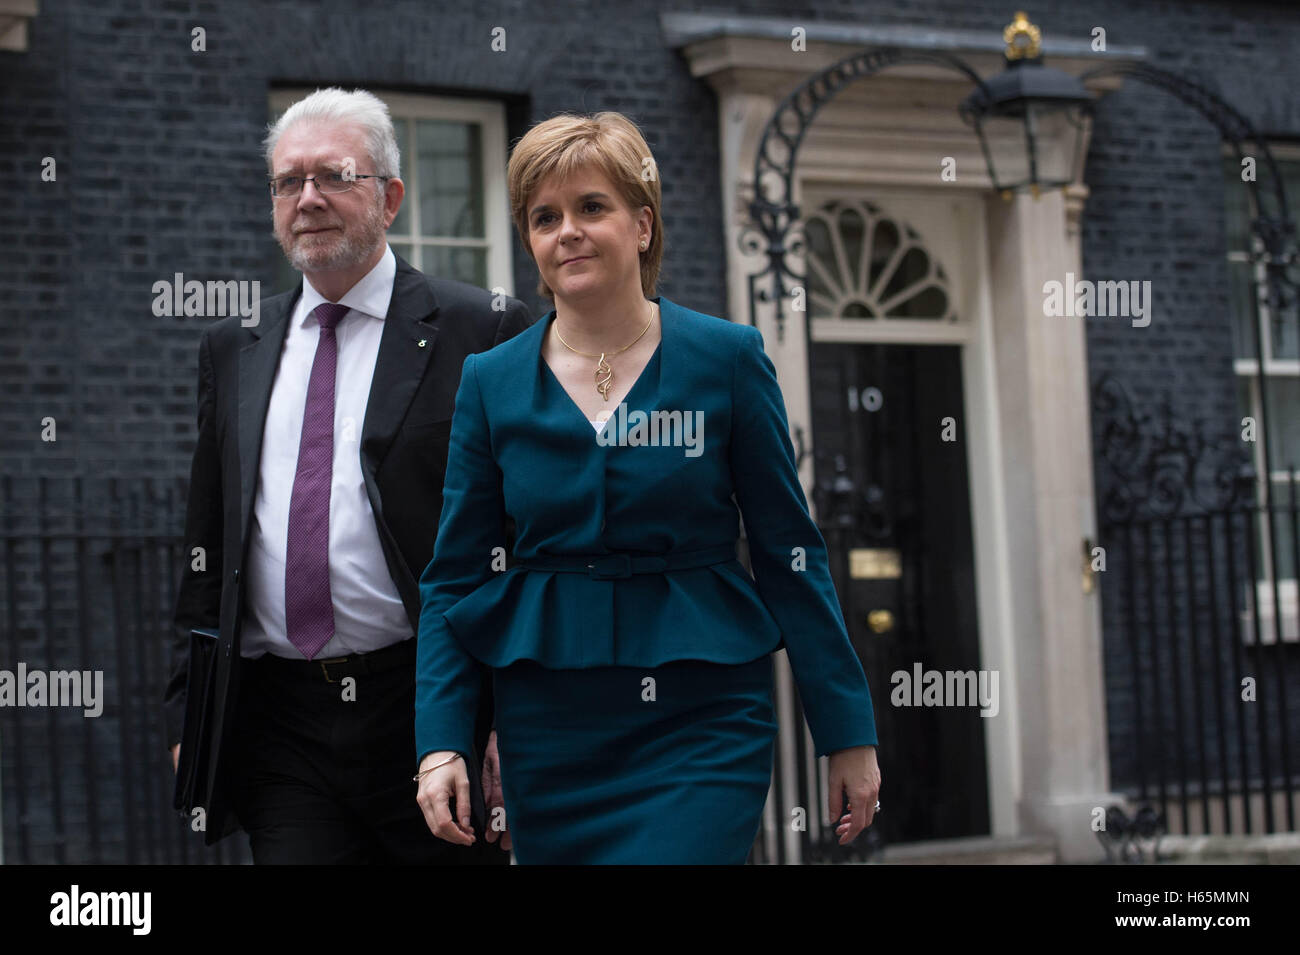 Scottish First Minister Nicola Sturgeon leaves 10 Downing Street in London today with her Brexit minister, Michael Russell after a meeting with Theresa May the leaders of the devolved parliaments of the British Isles to discuss the EU. Stock Photo